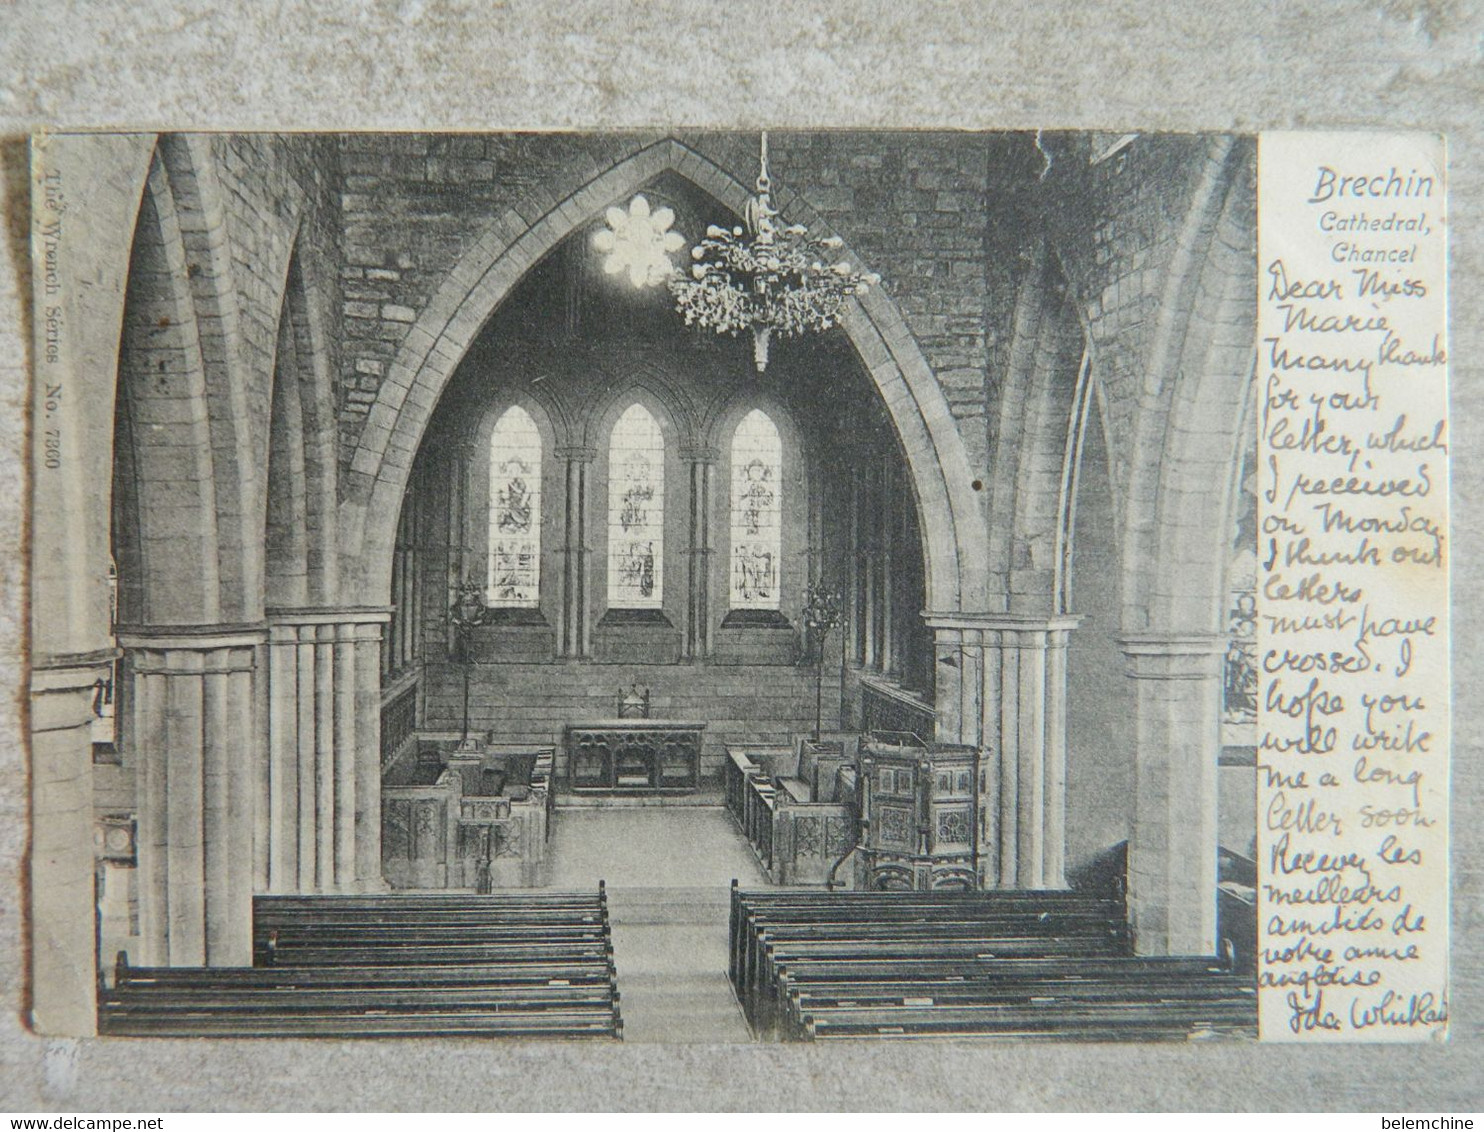 BRECHIN  CATHEDRAL CHANCEL - Angus